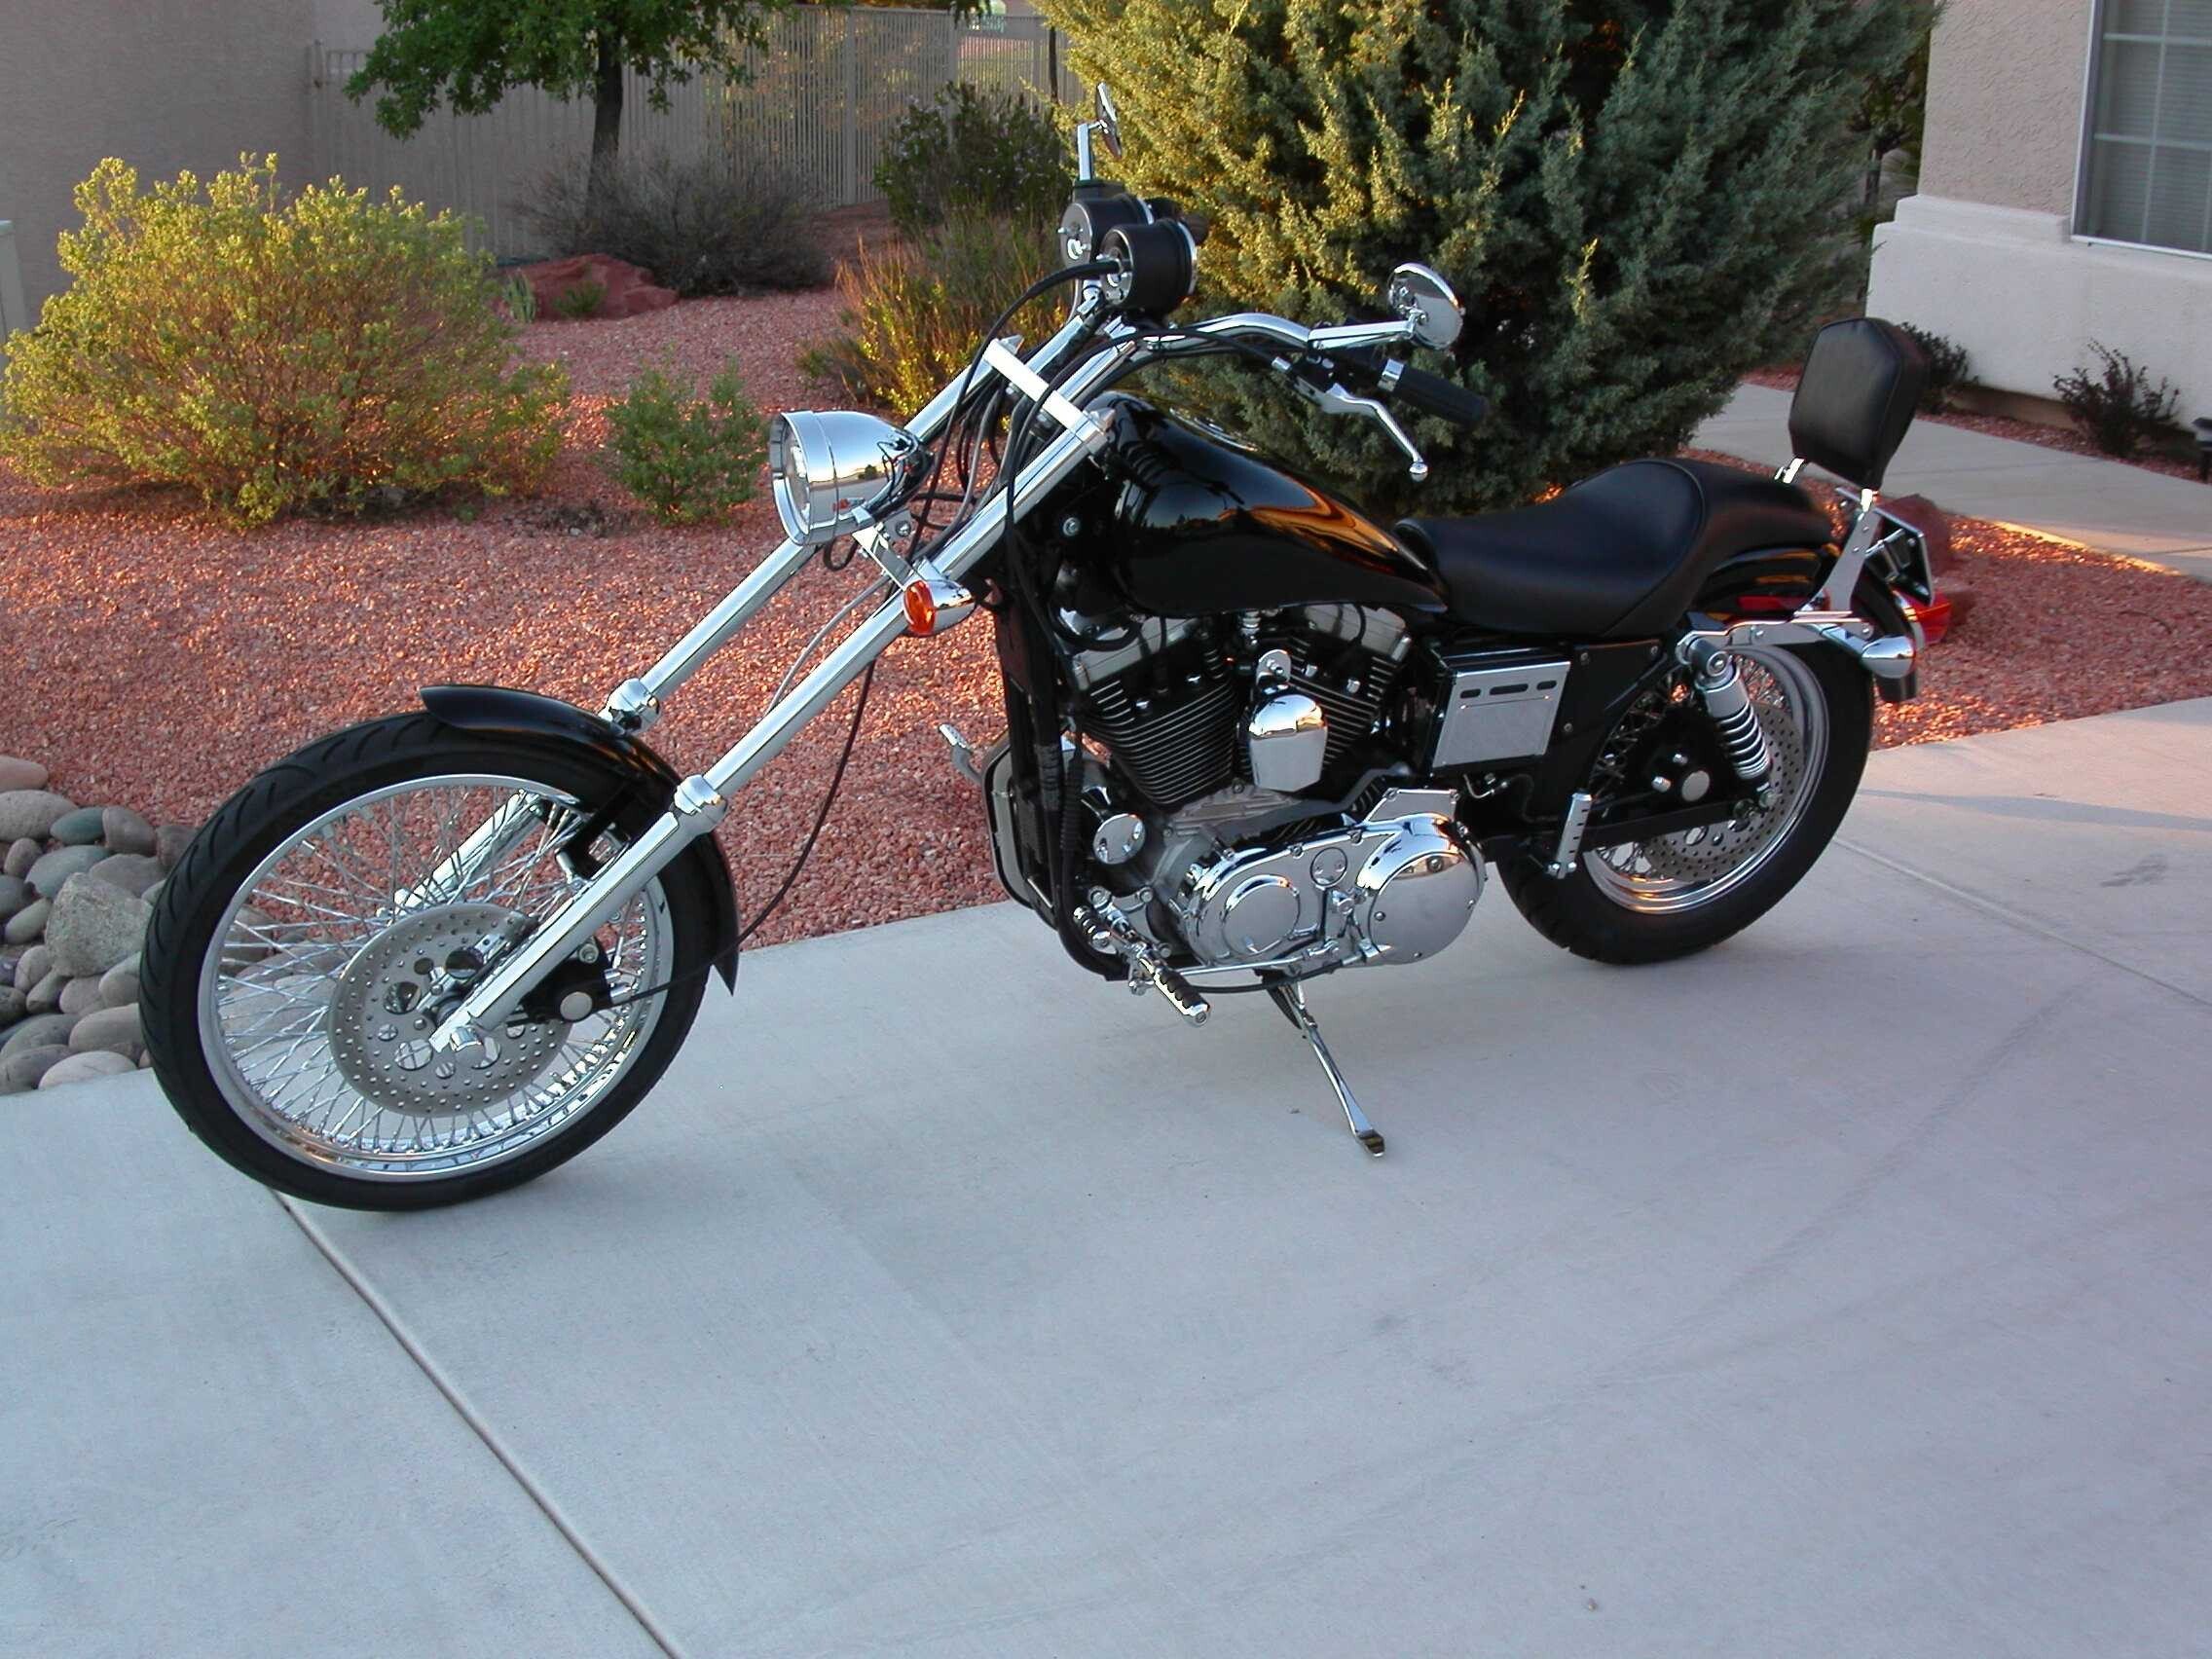 nightster 1200 for sale near me